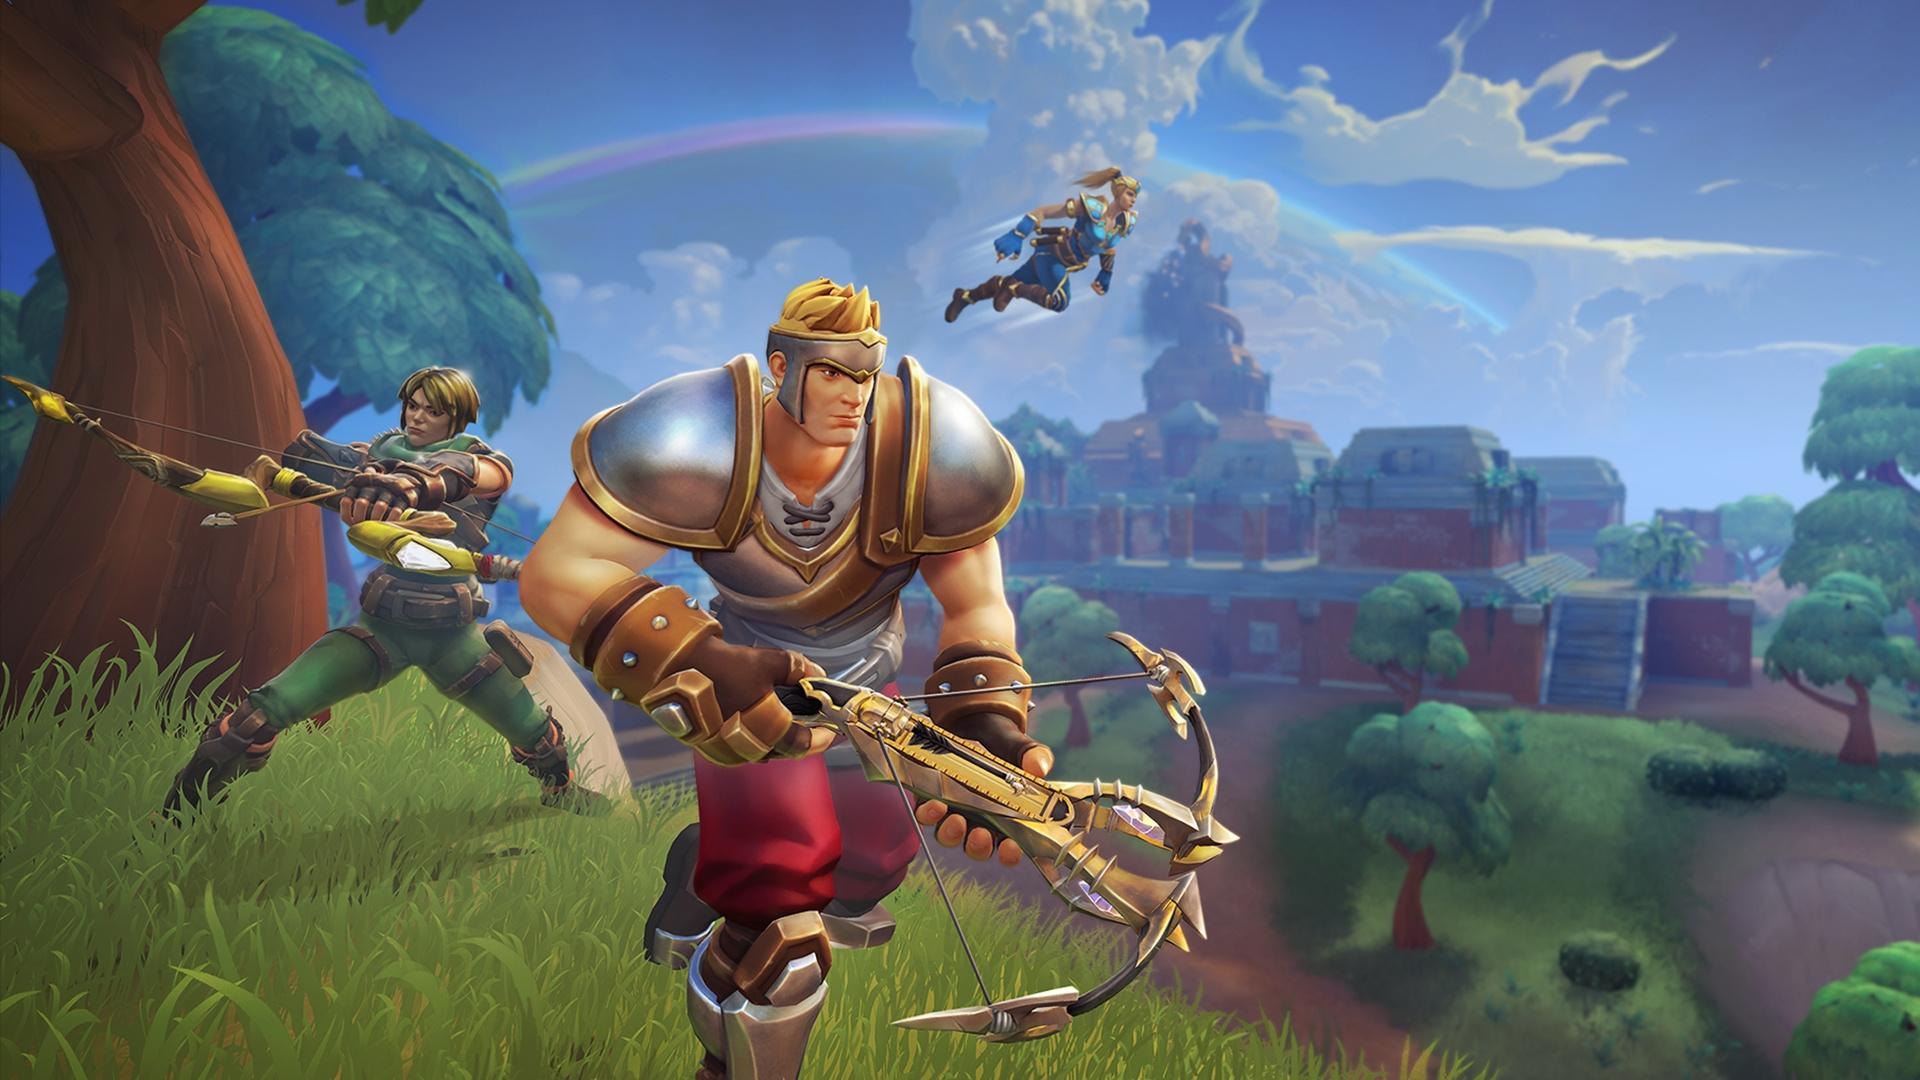 Rumour: Hi Rez Fantasy Game Realm Royale Is Switch Bound